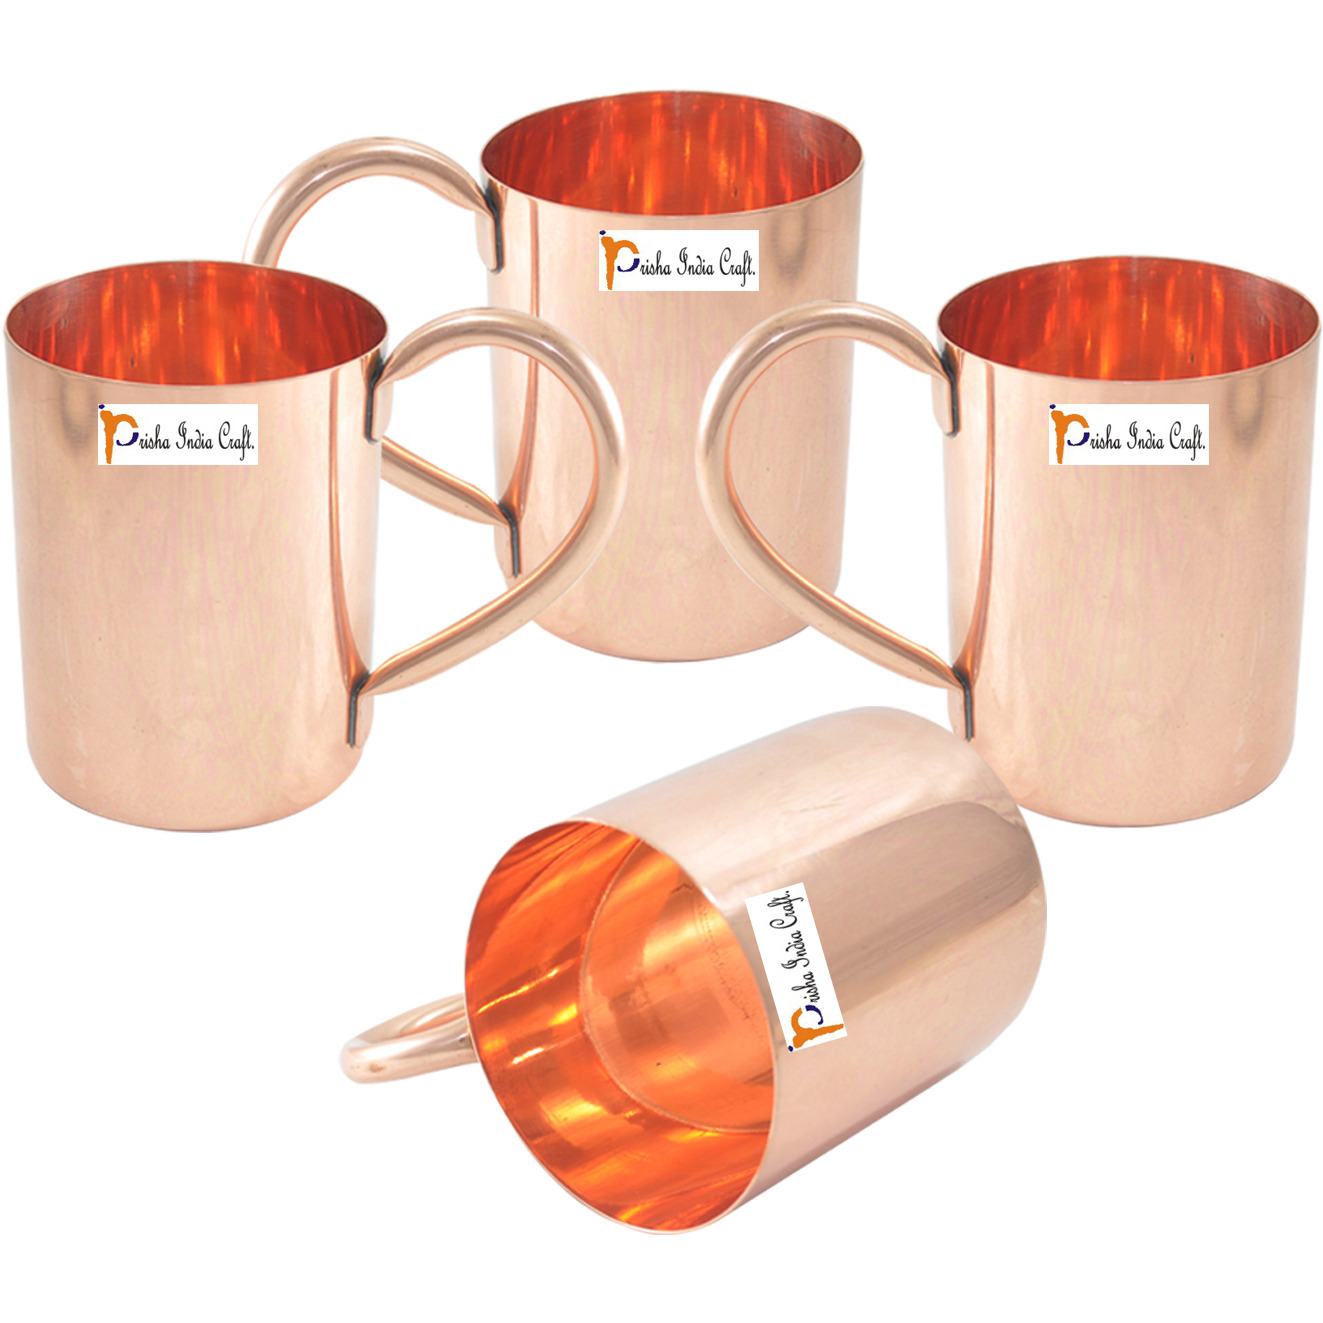 Set of 4 - Prisha India Craft B. Copper Mug for Moscow Mules 450 ML / 15 oz - 100% pure copper - Lacquered Finish - Solid Copper Best Quality Moscow Mule Mug, Moscow Mule Cocktail Cup, Copper Mugs, Cocktail Mugs